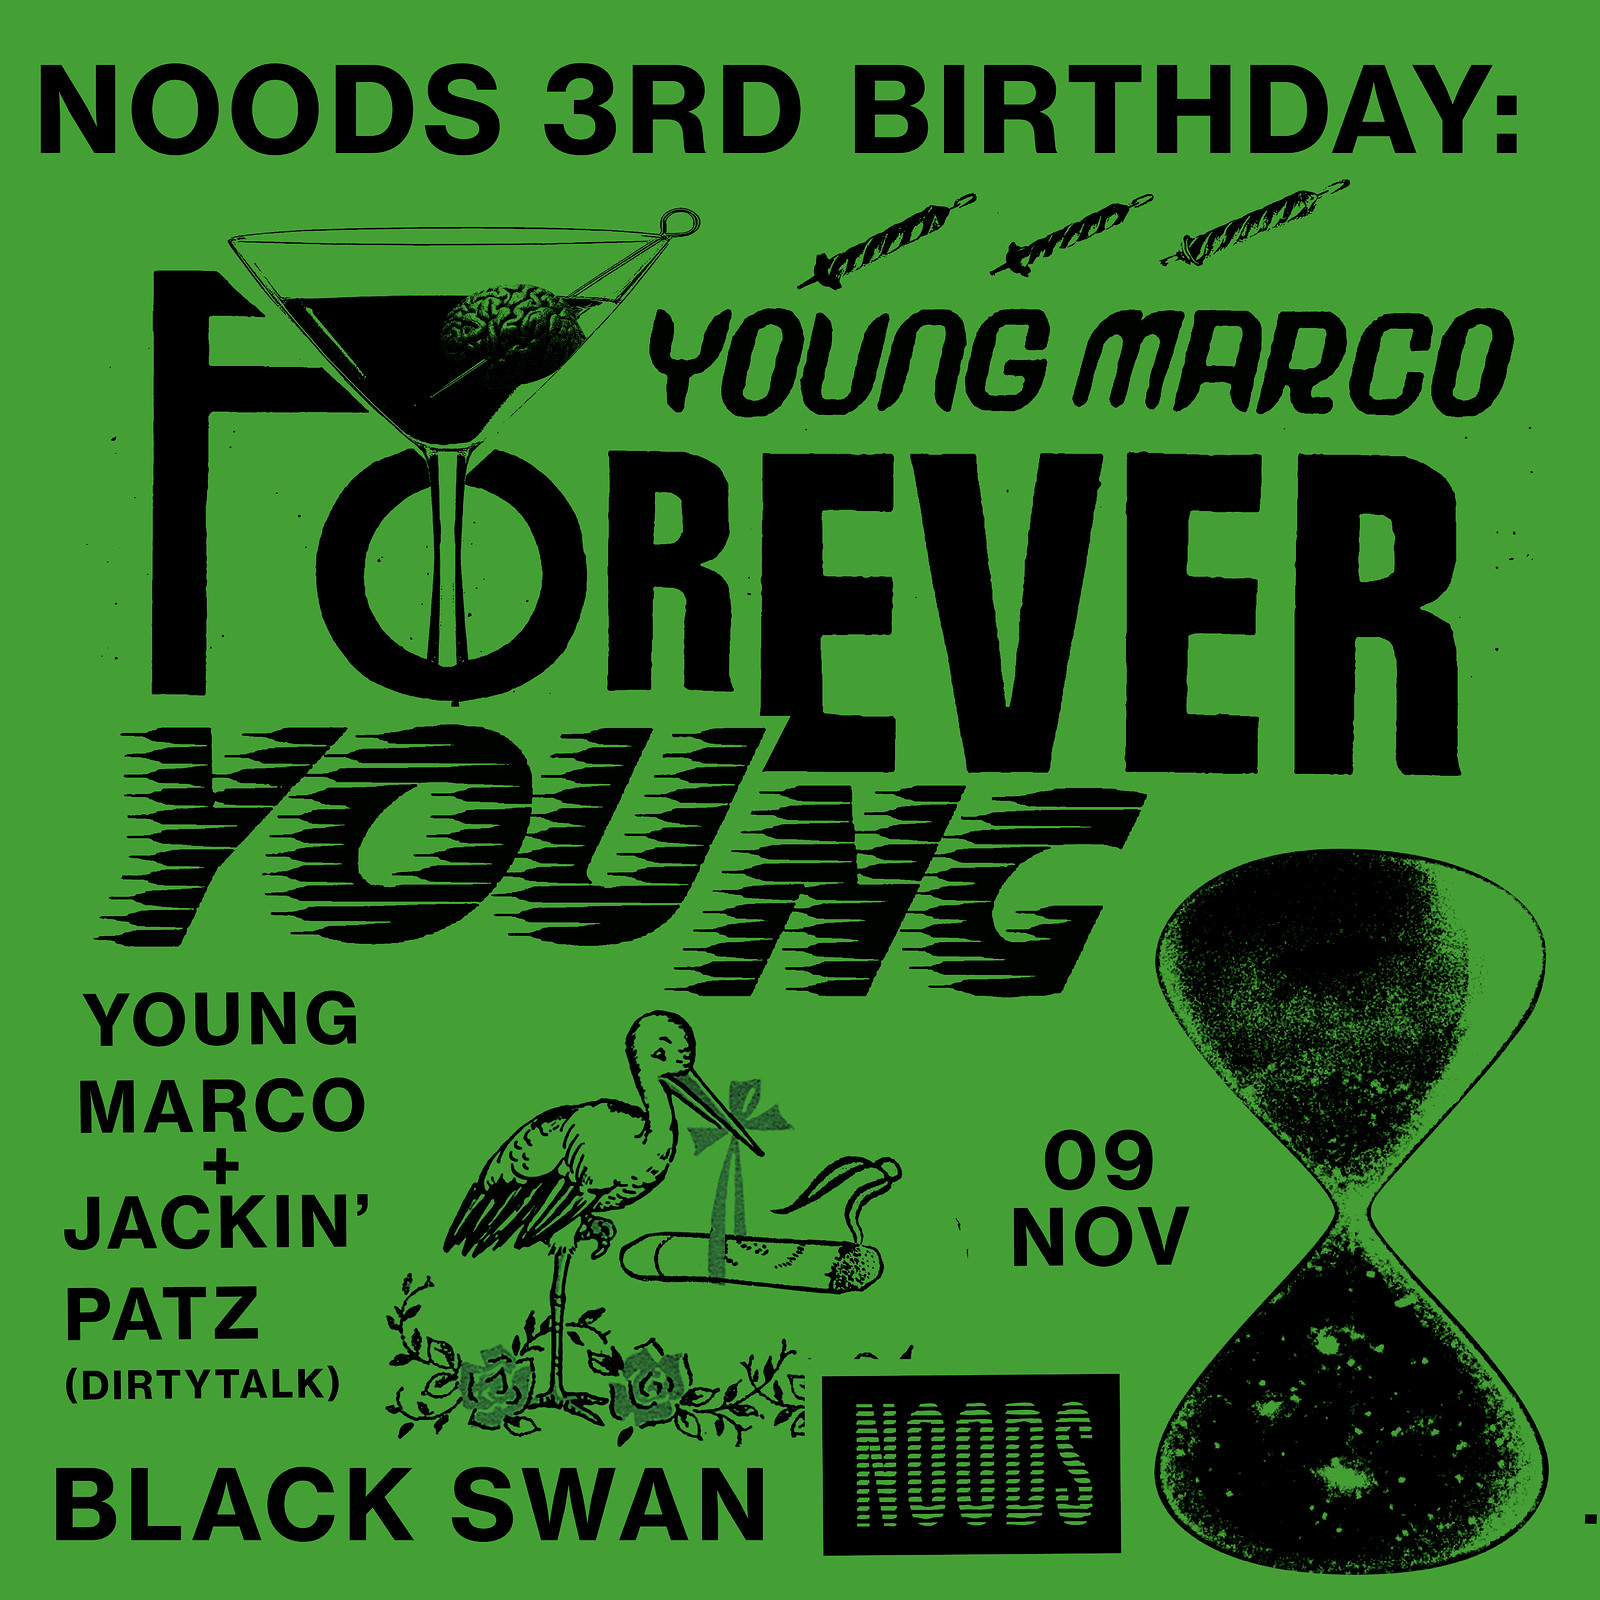 Noods 3rd Birthday: Young Marco & Jackin' Patz at The Black Swan